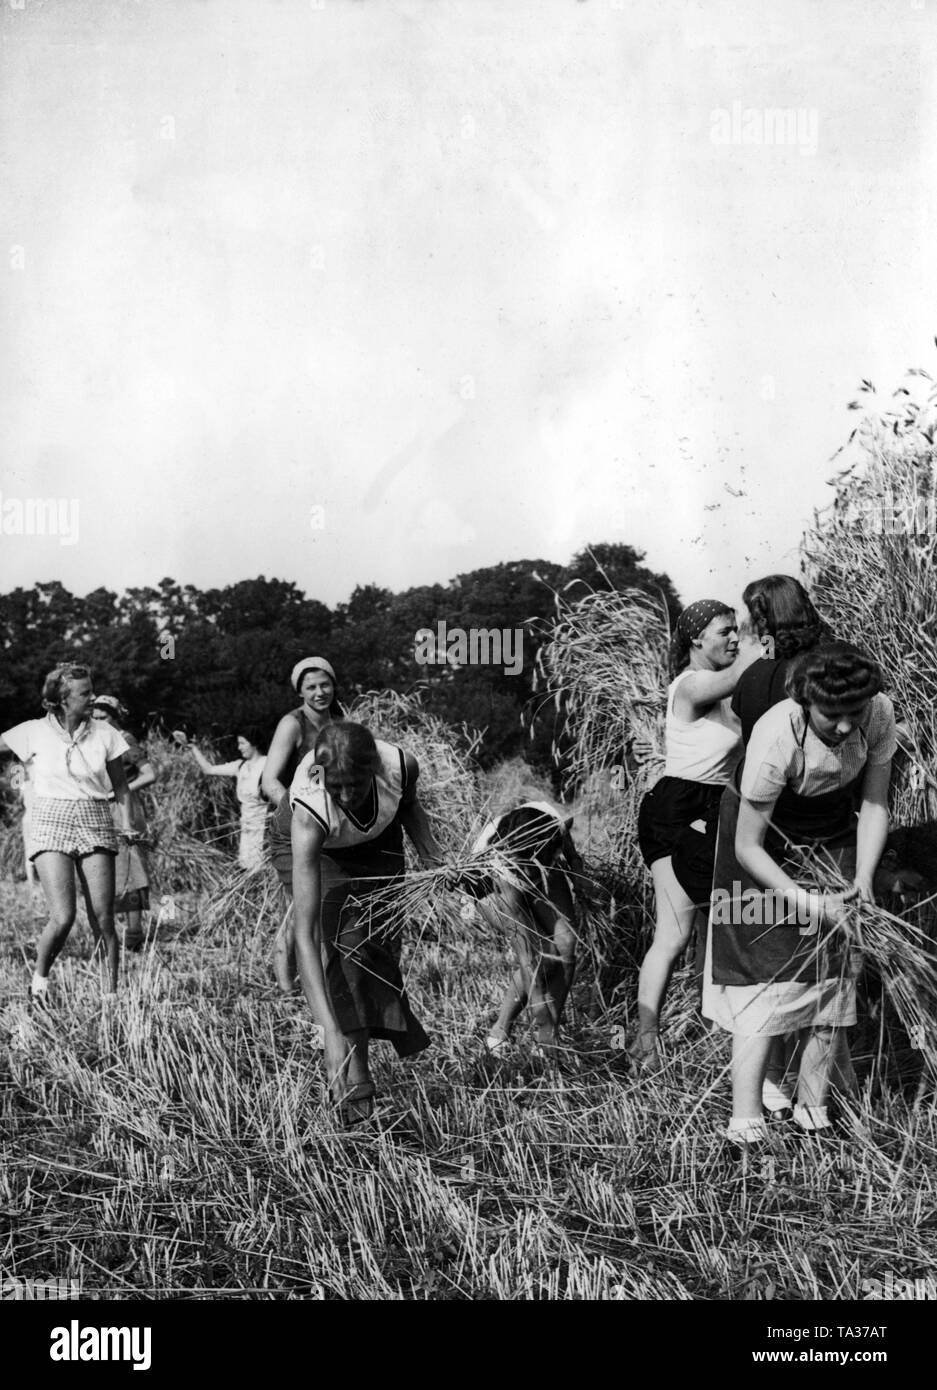 Women from the NS-Frauenschaft (National Socialist Women's League), different youth groups and the Deutsches Frauenwerk are helping with a harvest in the local area during the weekend. Here, a rye harvest in a field in Berlin. Stock Photo